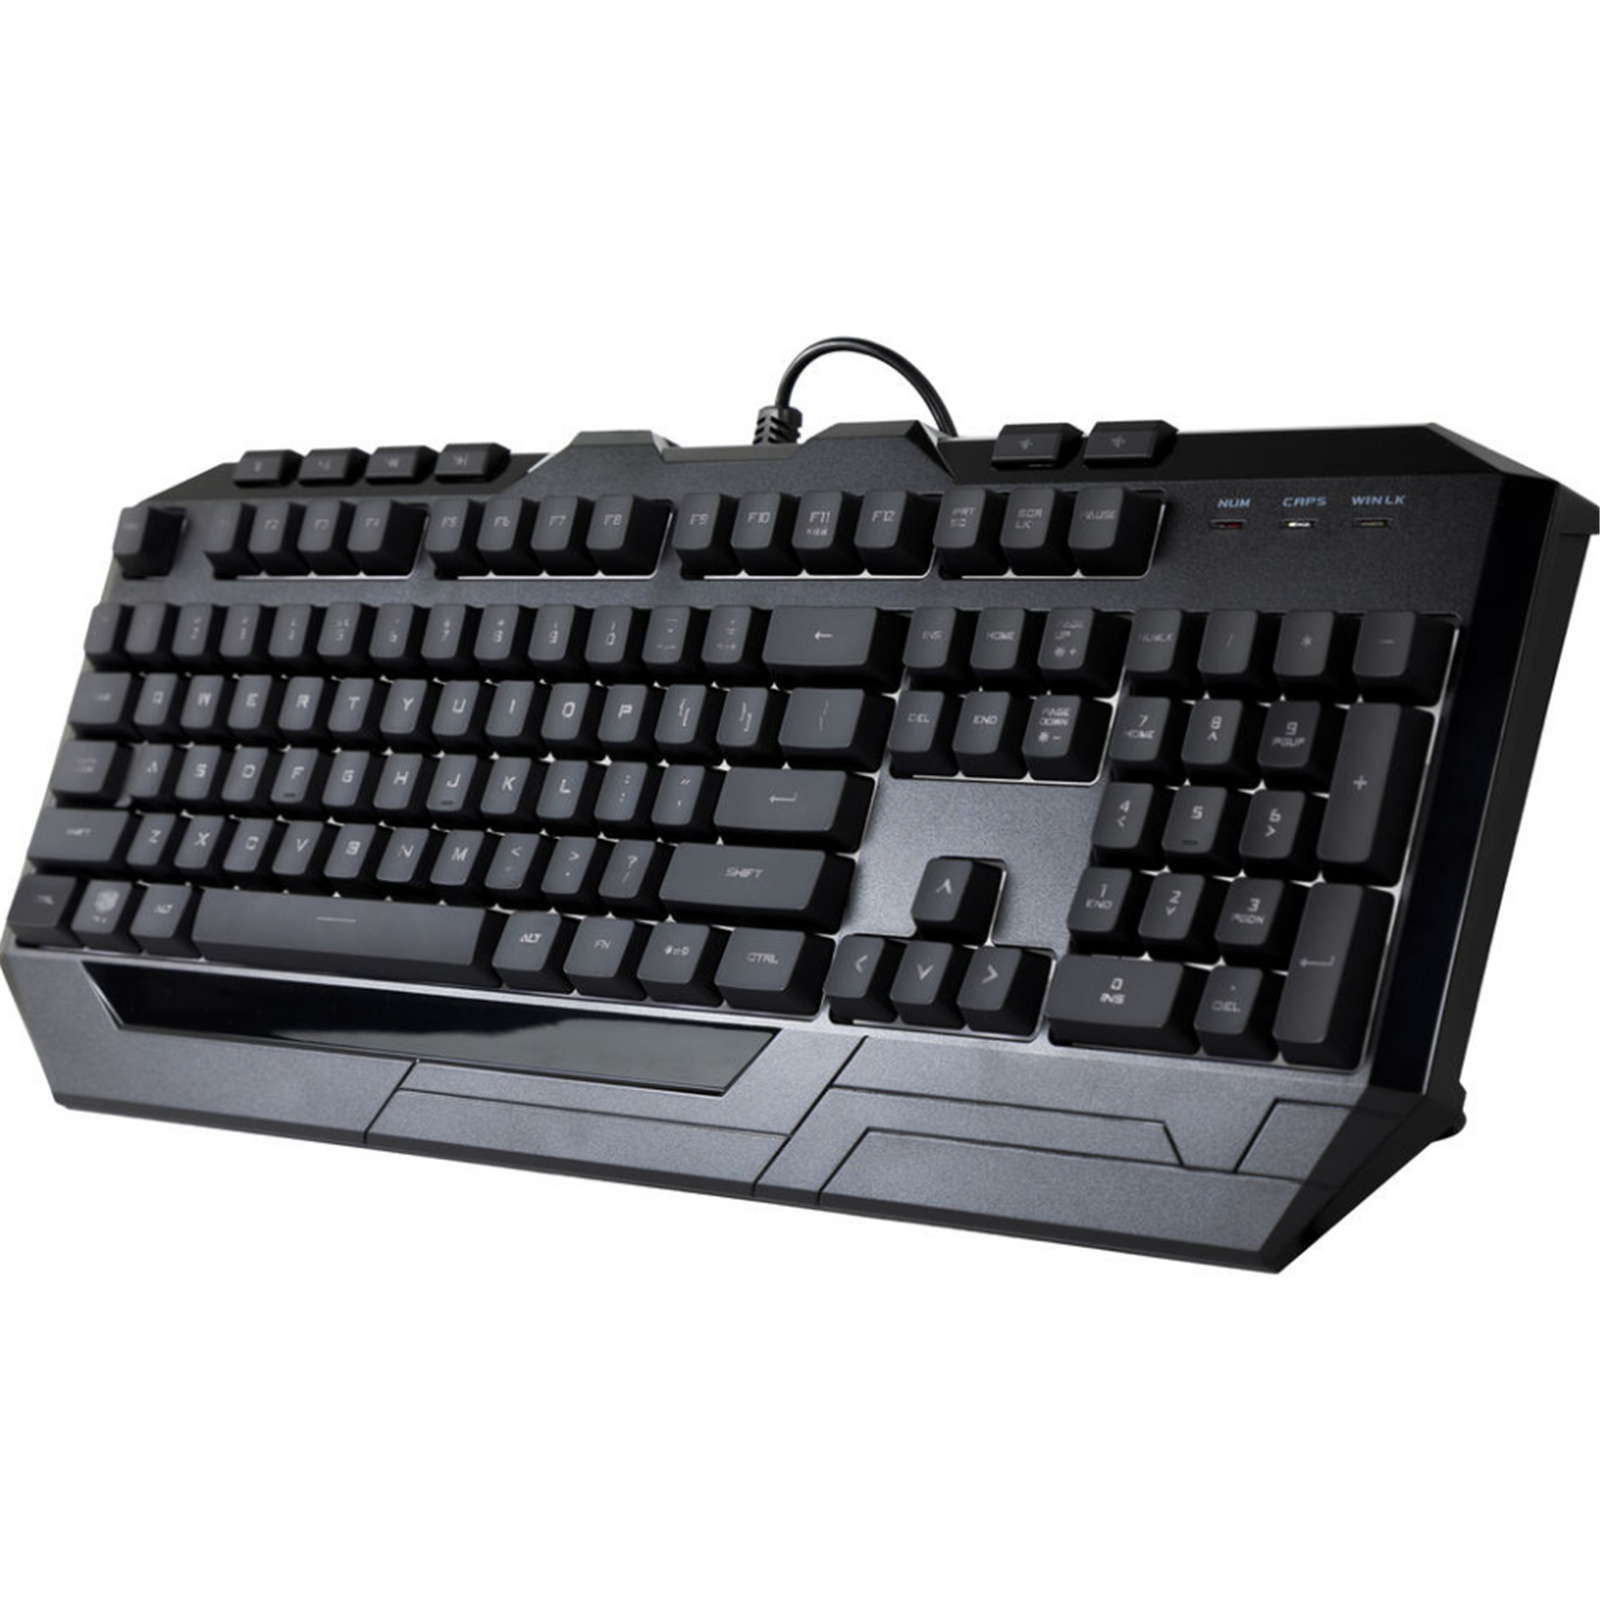 the Cooler Master Devastator III Gaming Keyboard & Mouse Combo ( SGB-3000-KKMF3-US ) online - PBTech.com/pacific